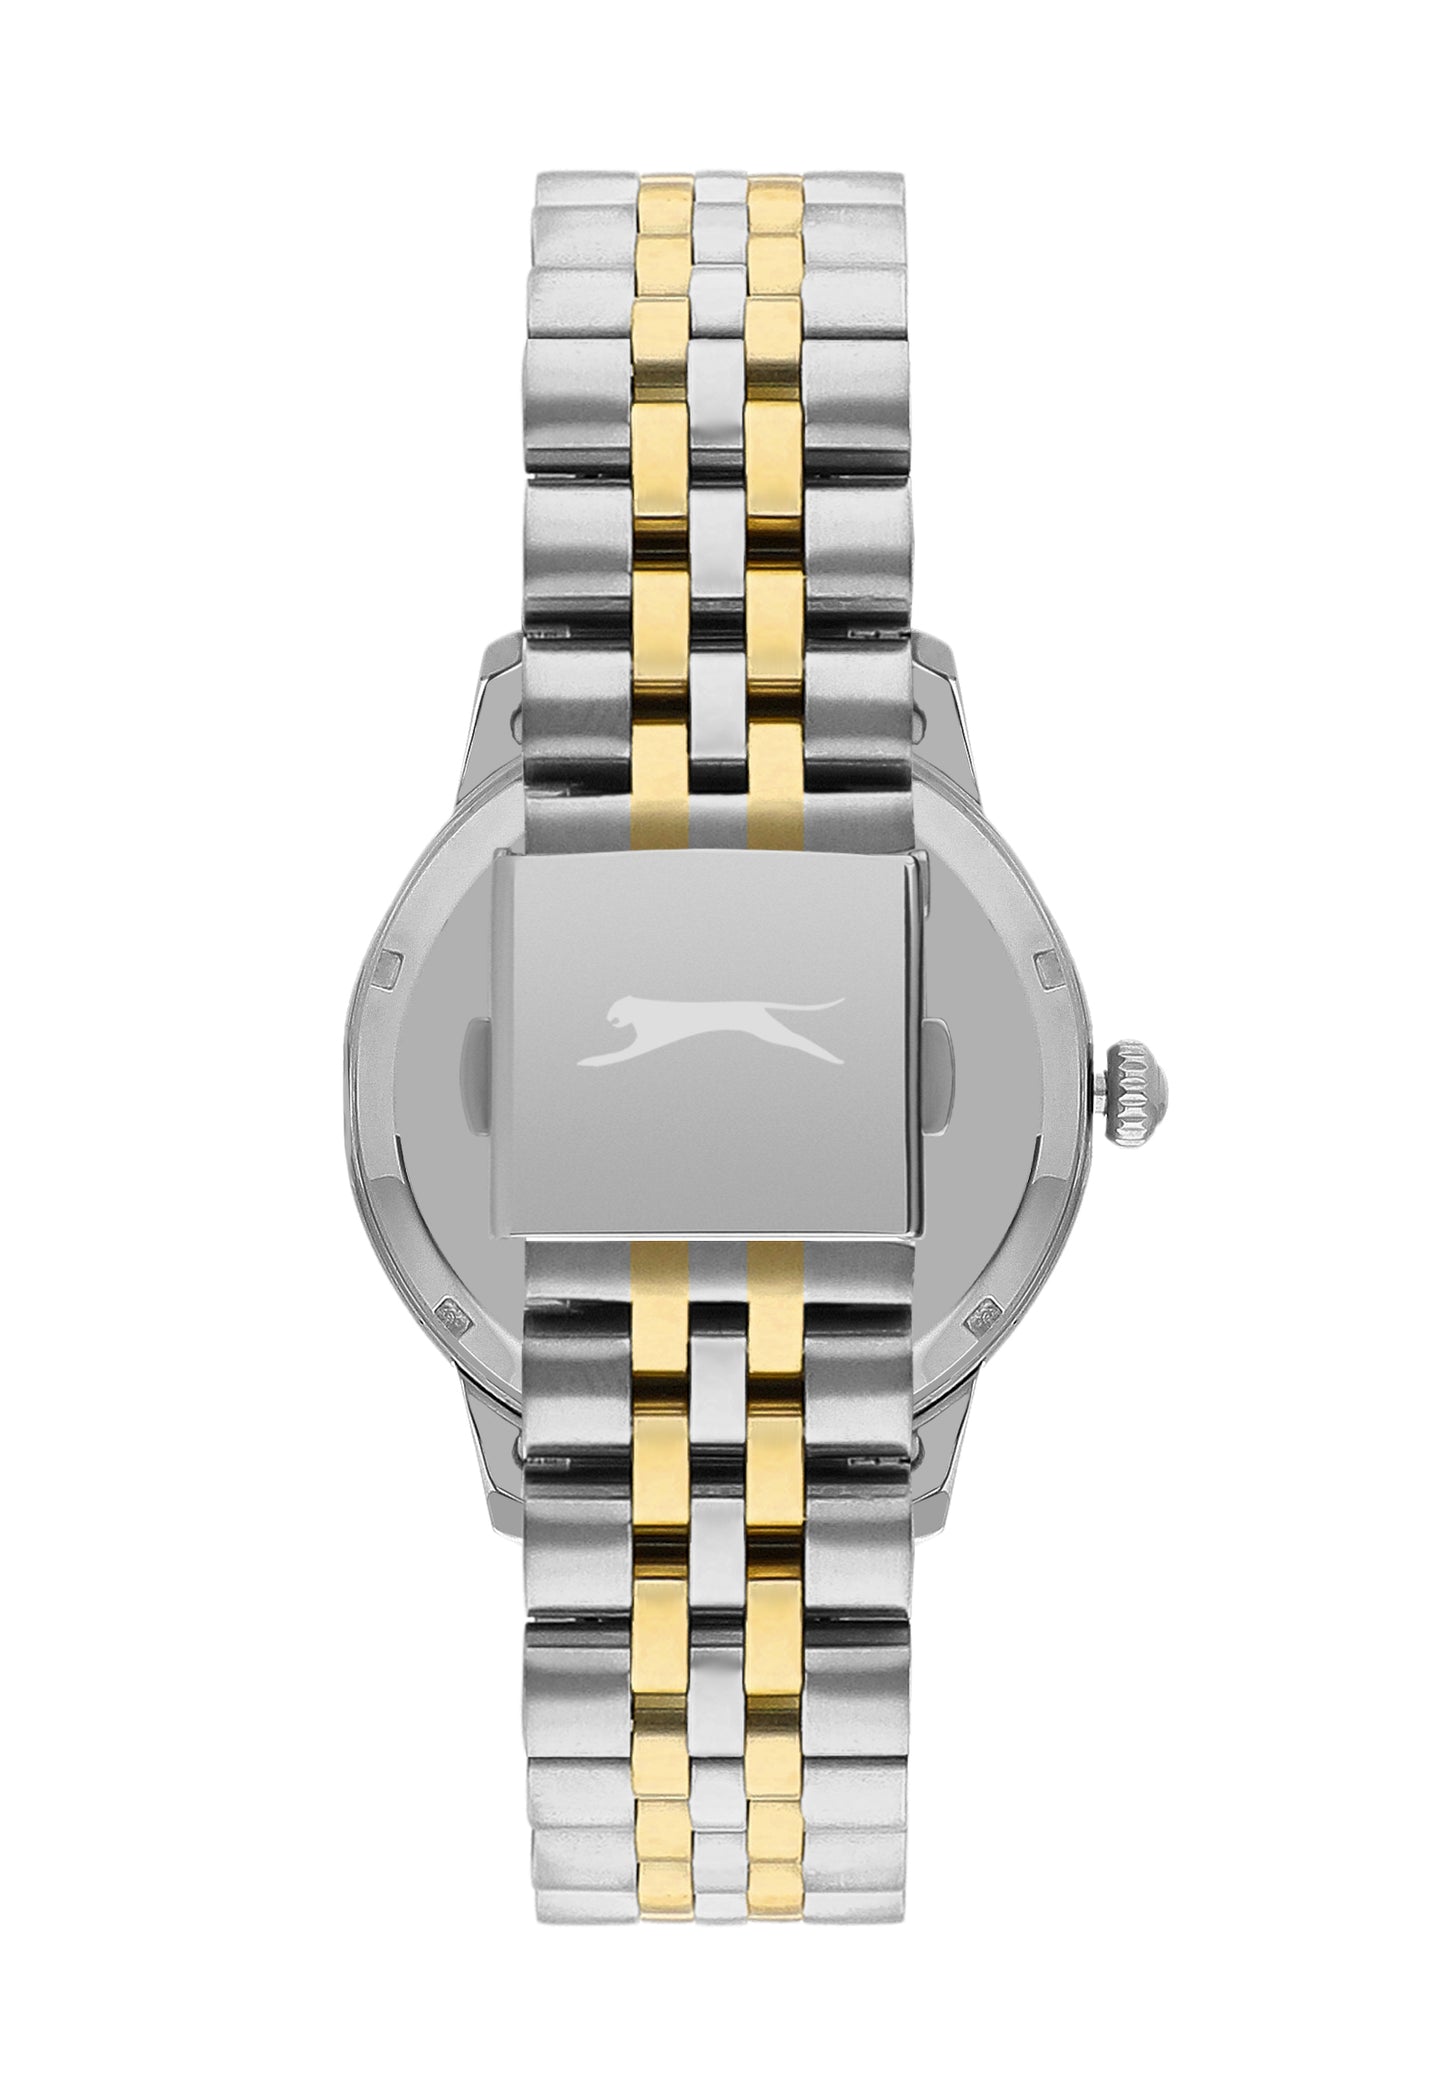 Slazenger Automatic See Through Movement Solid Stainless Steel Gents Watch - SL.9.2269.1.03 Luxury Business Sports